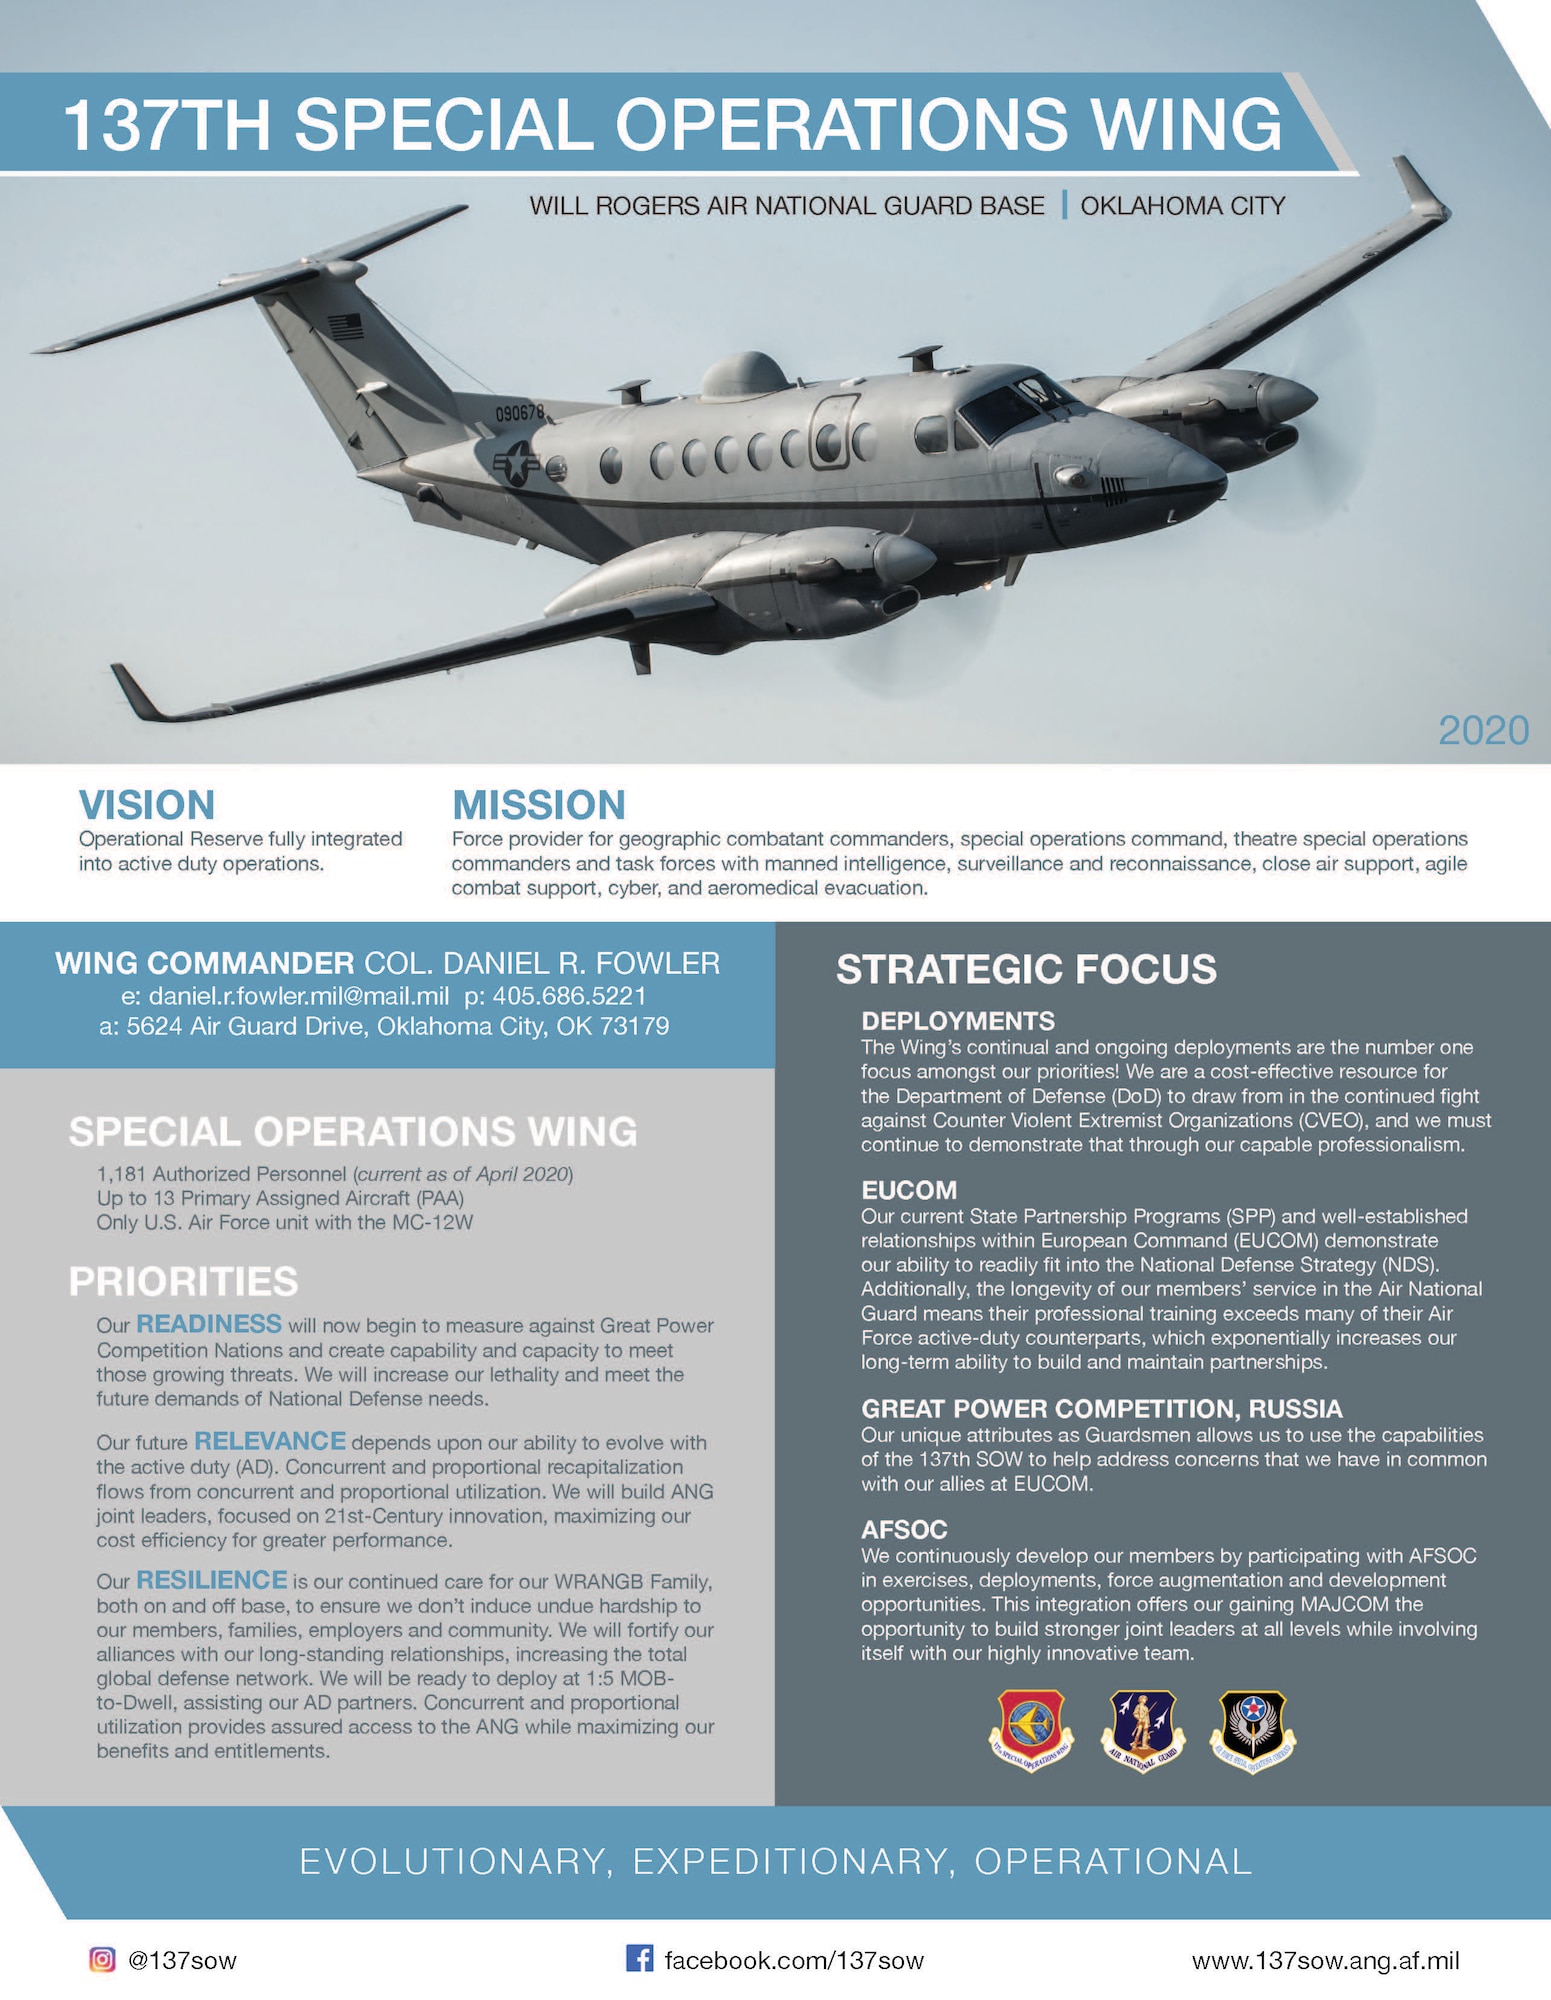 The fact sheet of the 137th Special Operations Wing.